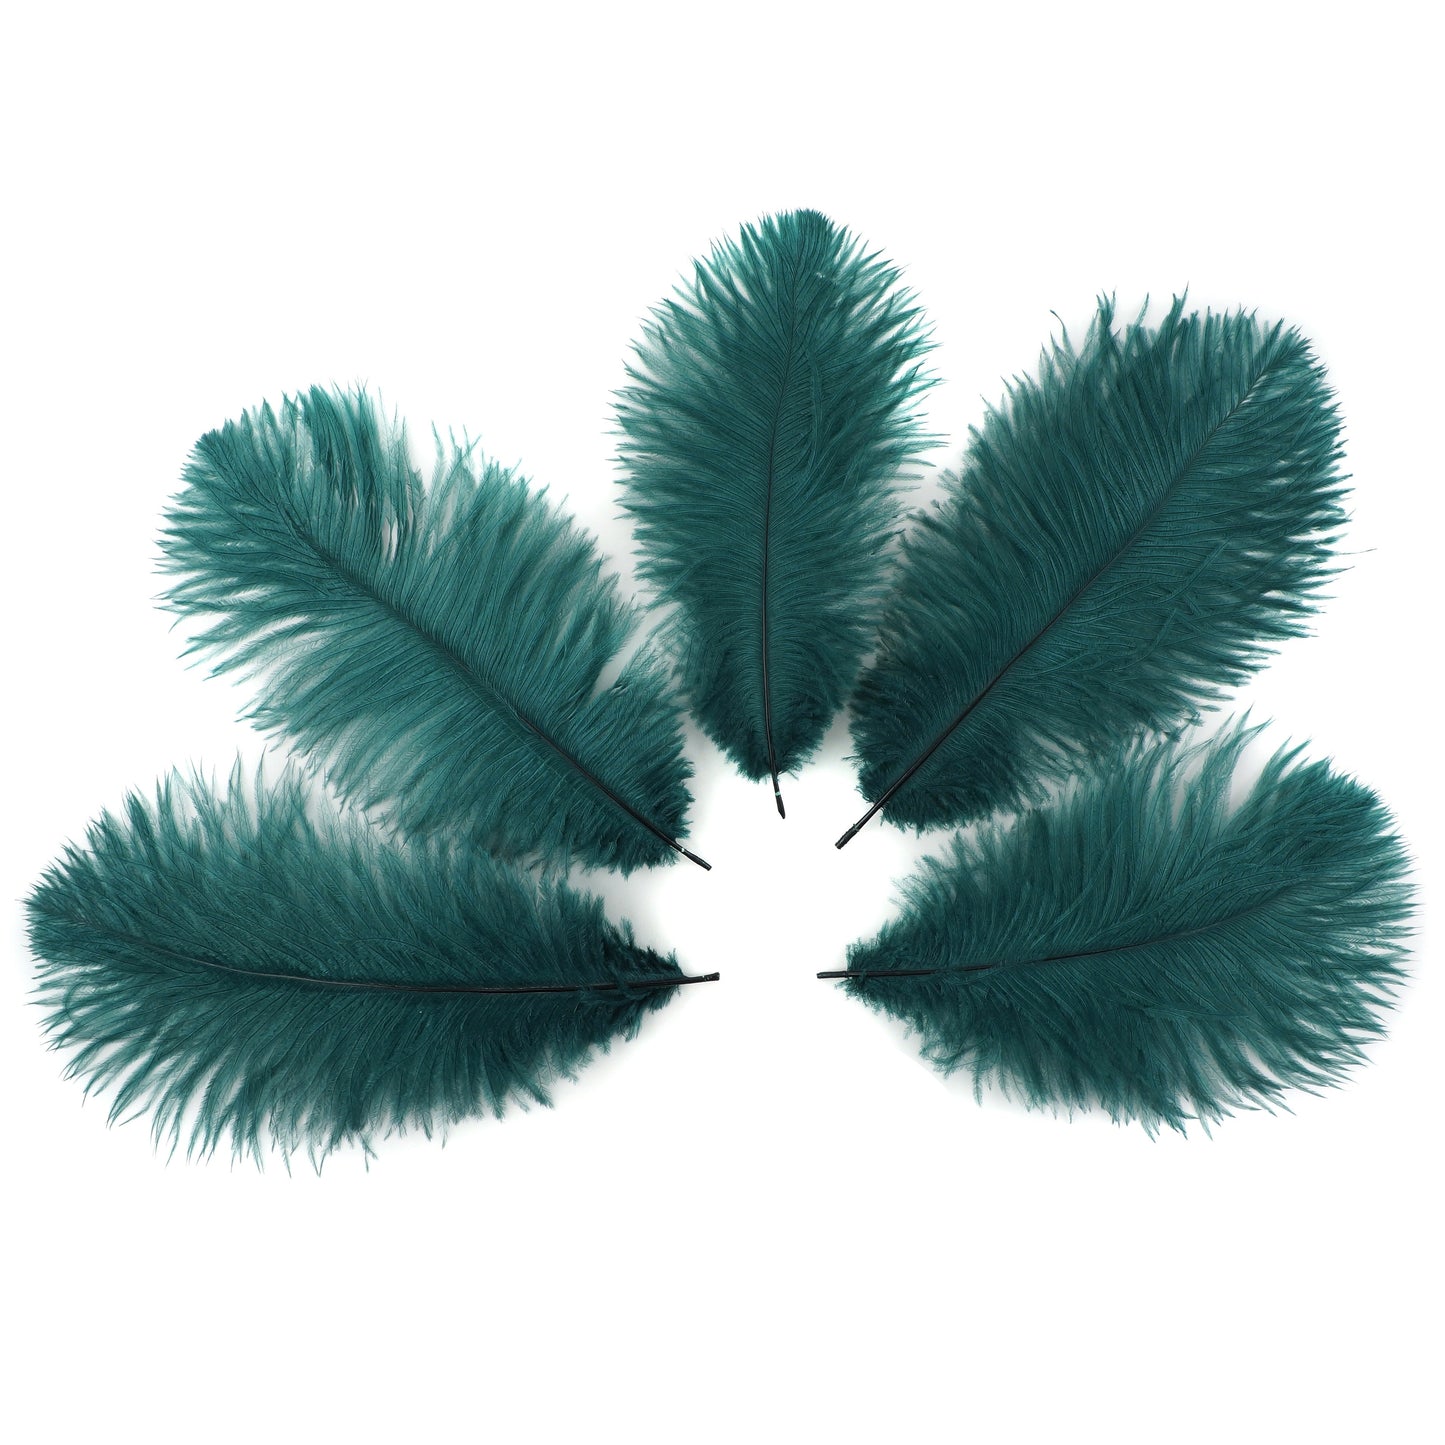 Ostrich Feathers 9-12" Drabs - Teal